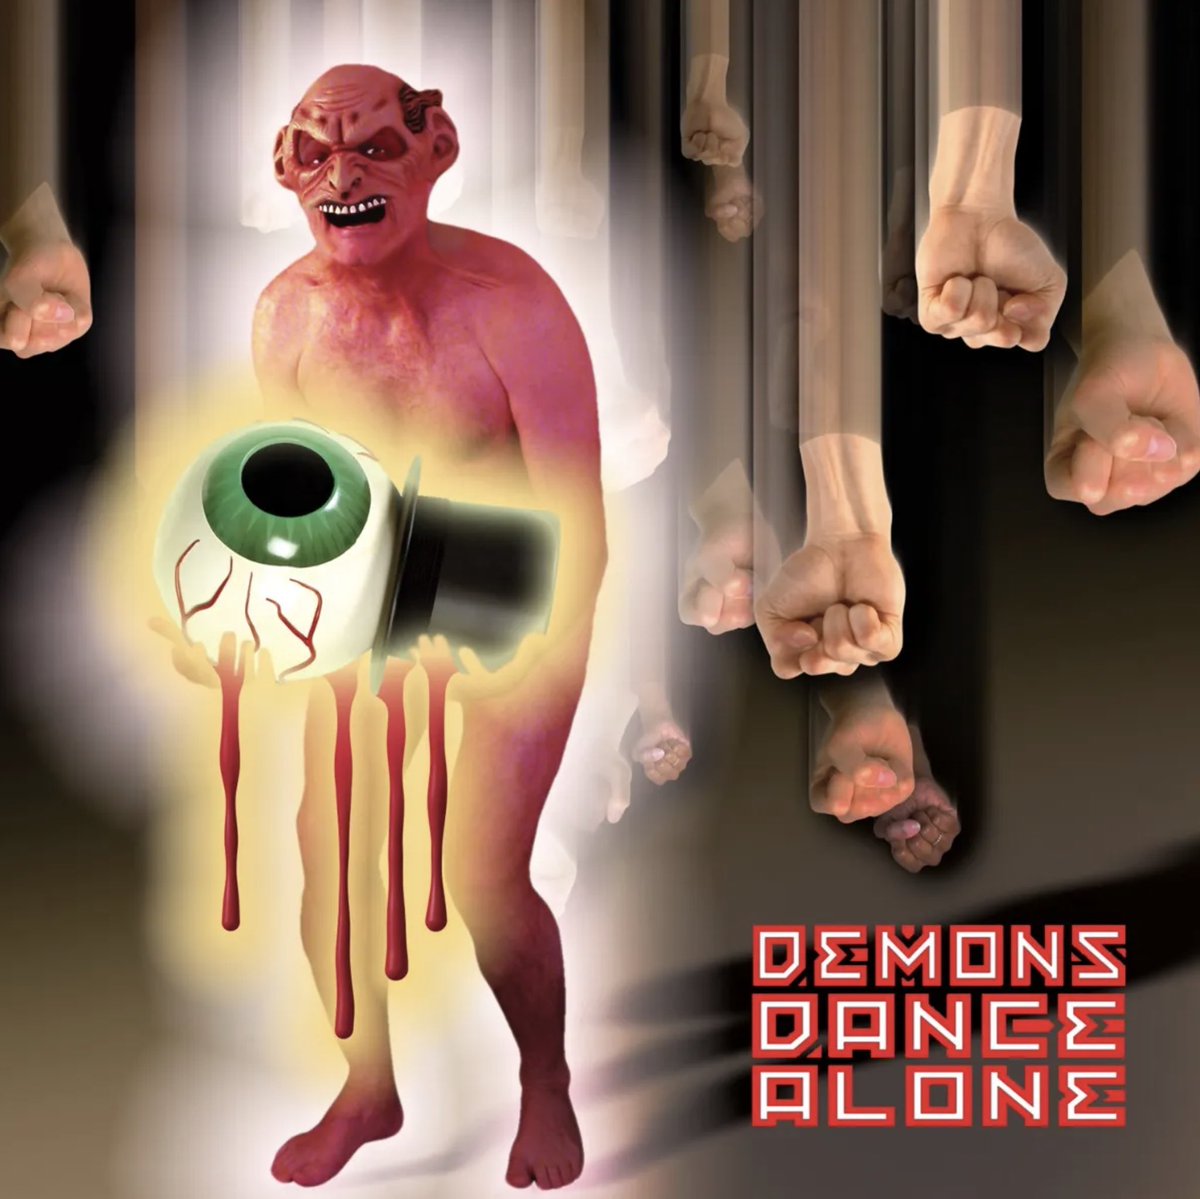 Demons Dance Alone pREServed is here! A 3CD set packed full of 20+ previously unreleased demos, live and live-in-the-studio tracks, plus a long-awaited 2LP set arriving in June. All you need to know right: cherryred.co/TheResidents